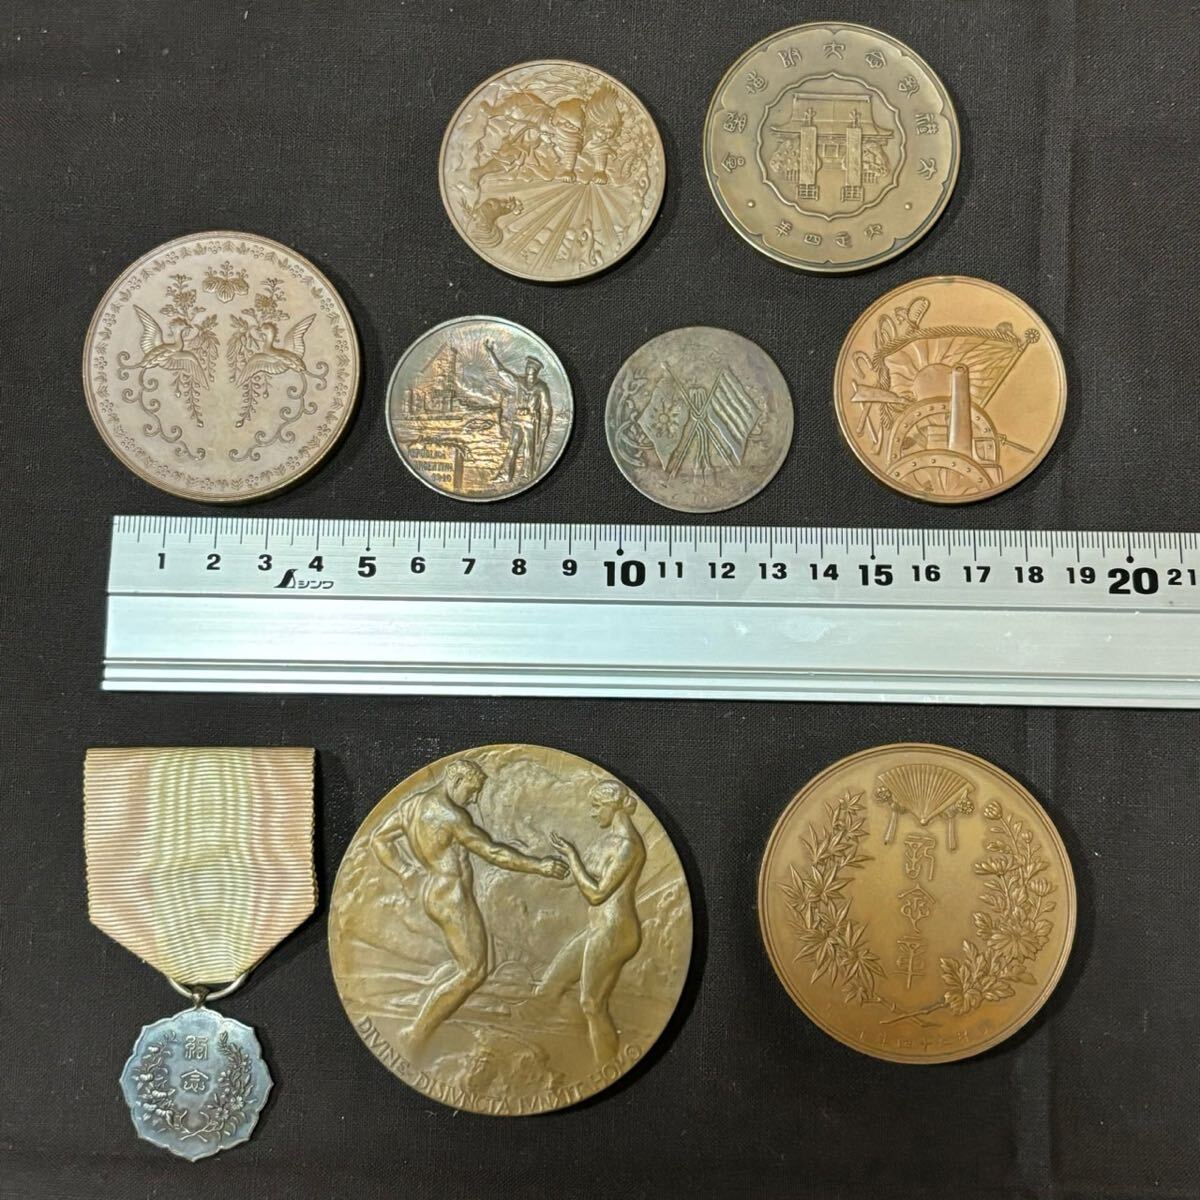 38 rare * memory medal order 10 pieces set copper medal Meiji era commemorative coin gold . prohibitation memory ... male . Inoue ...[ postage exhibitior charge *1 jpy start ]